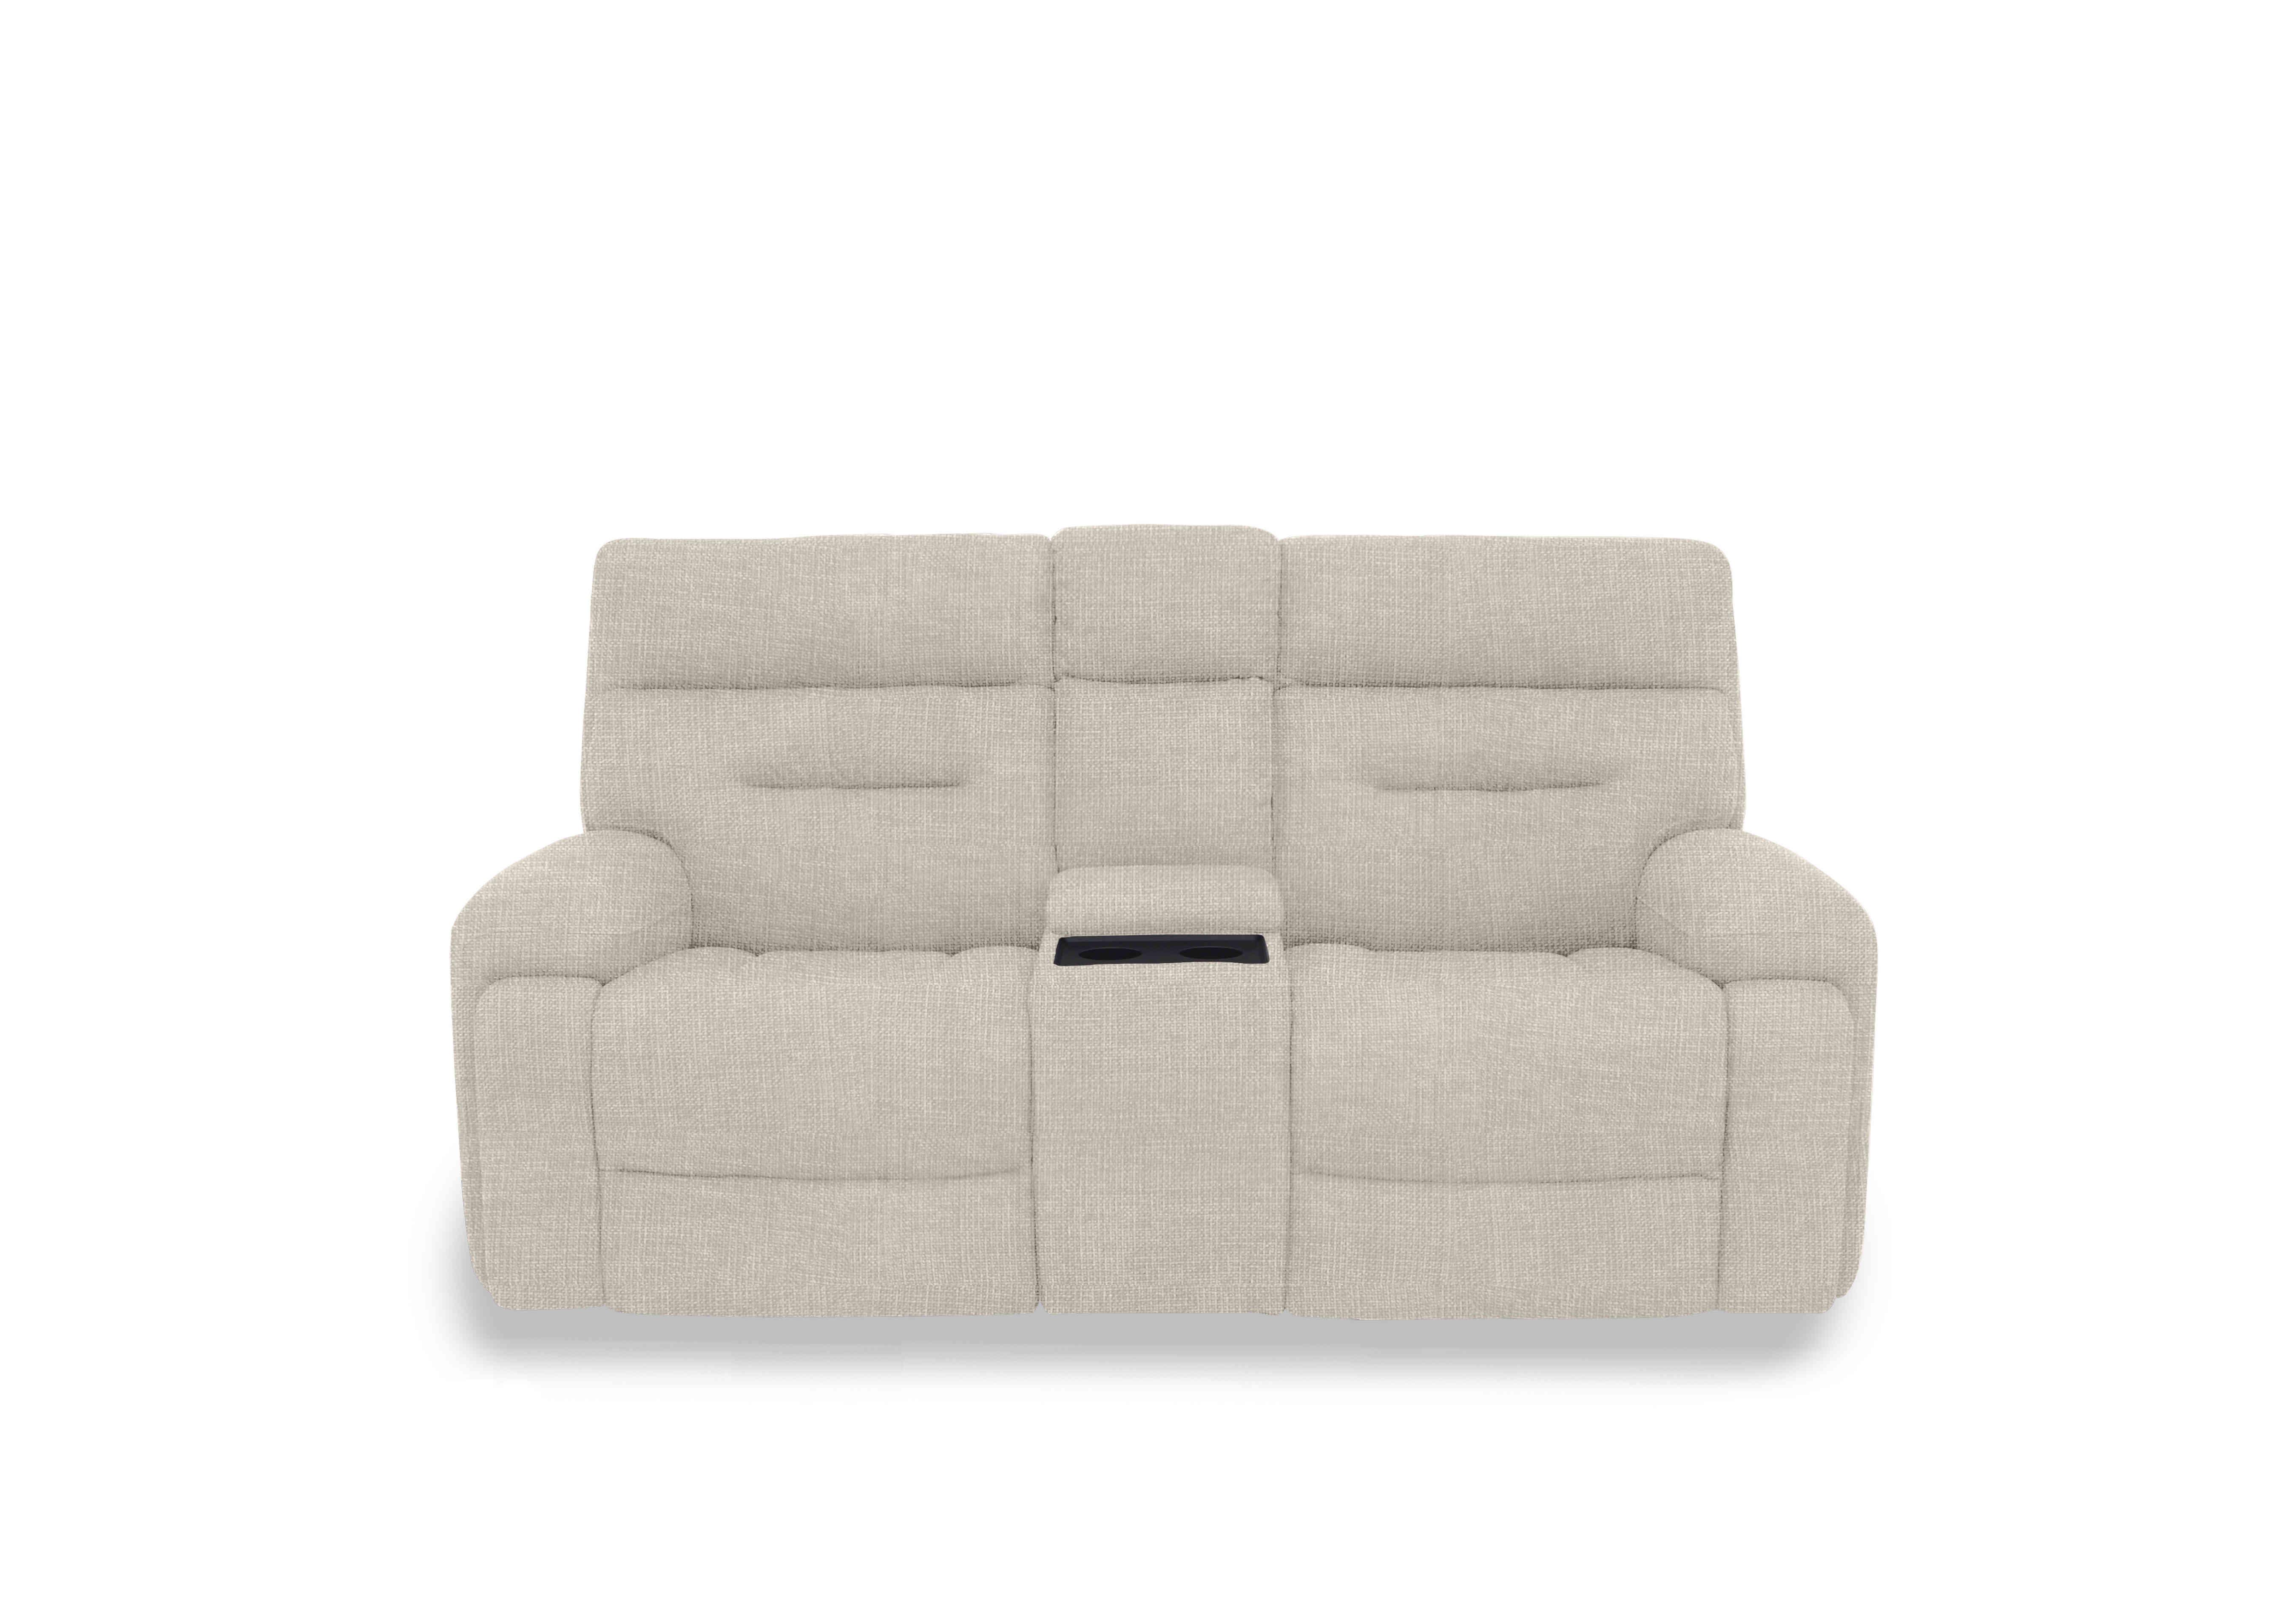 Cinemax Media 2 Seater Fabric Power Recliner Sofa with Power Headrests in We-0102  Weave Stone on Furniture Village